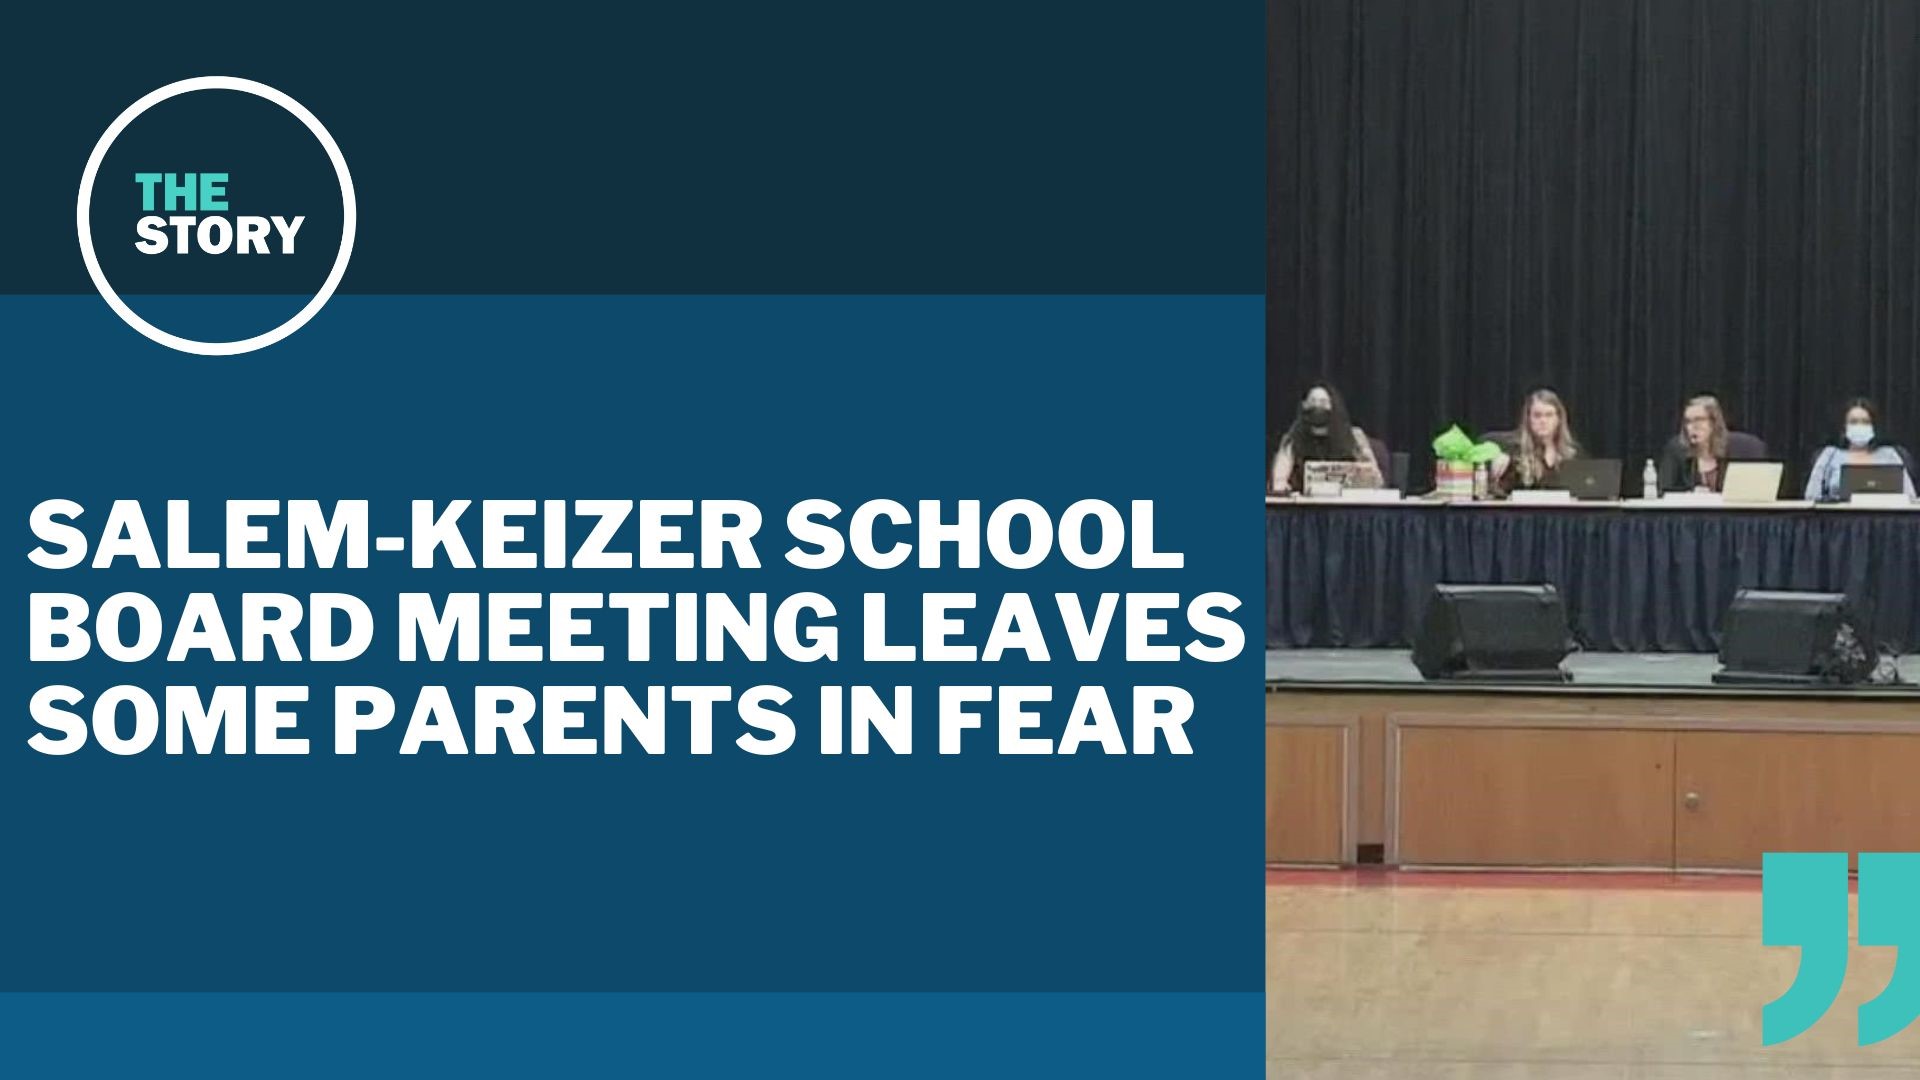 Both parents and students expressed that they did not feel safe amid accusations of white supremacy and transphobia.